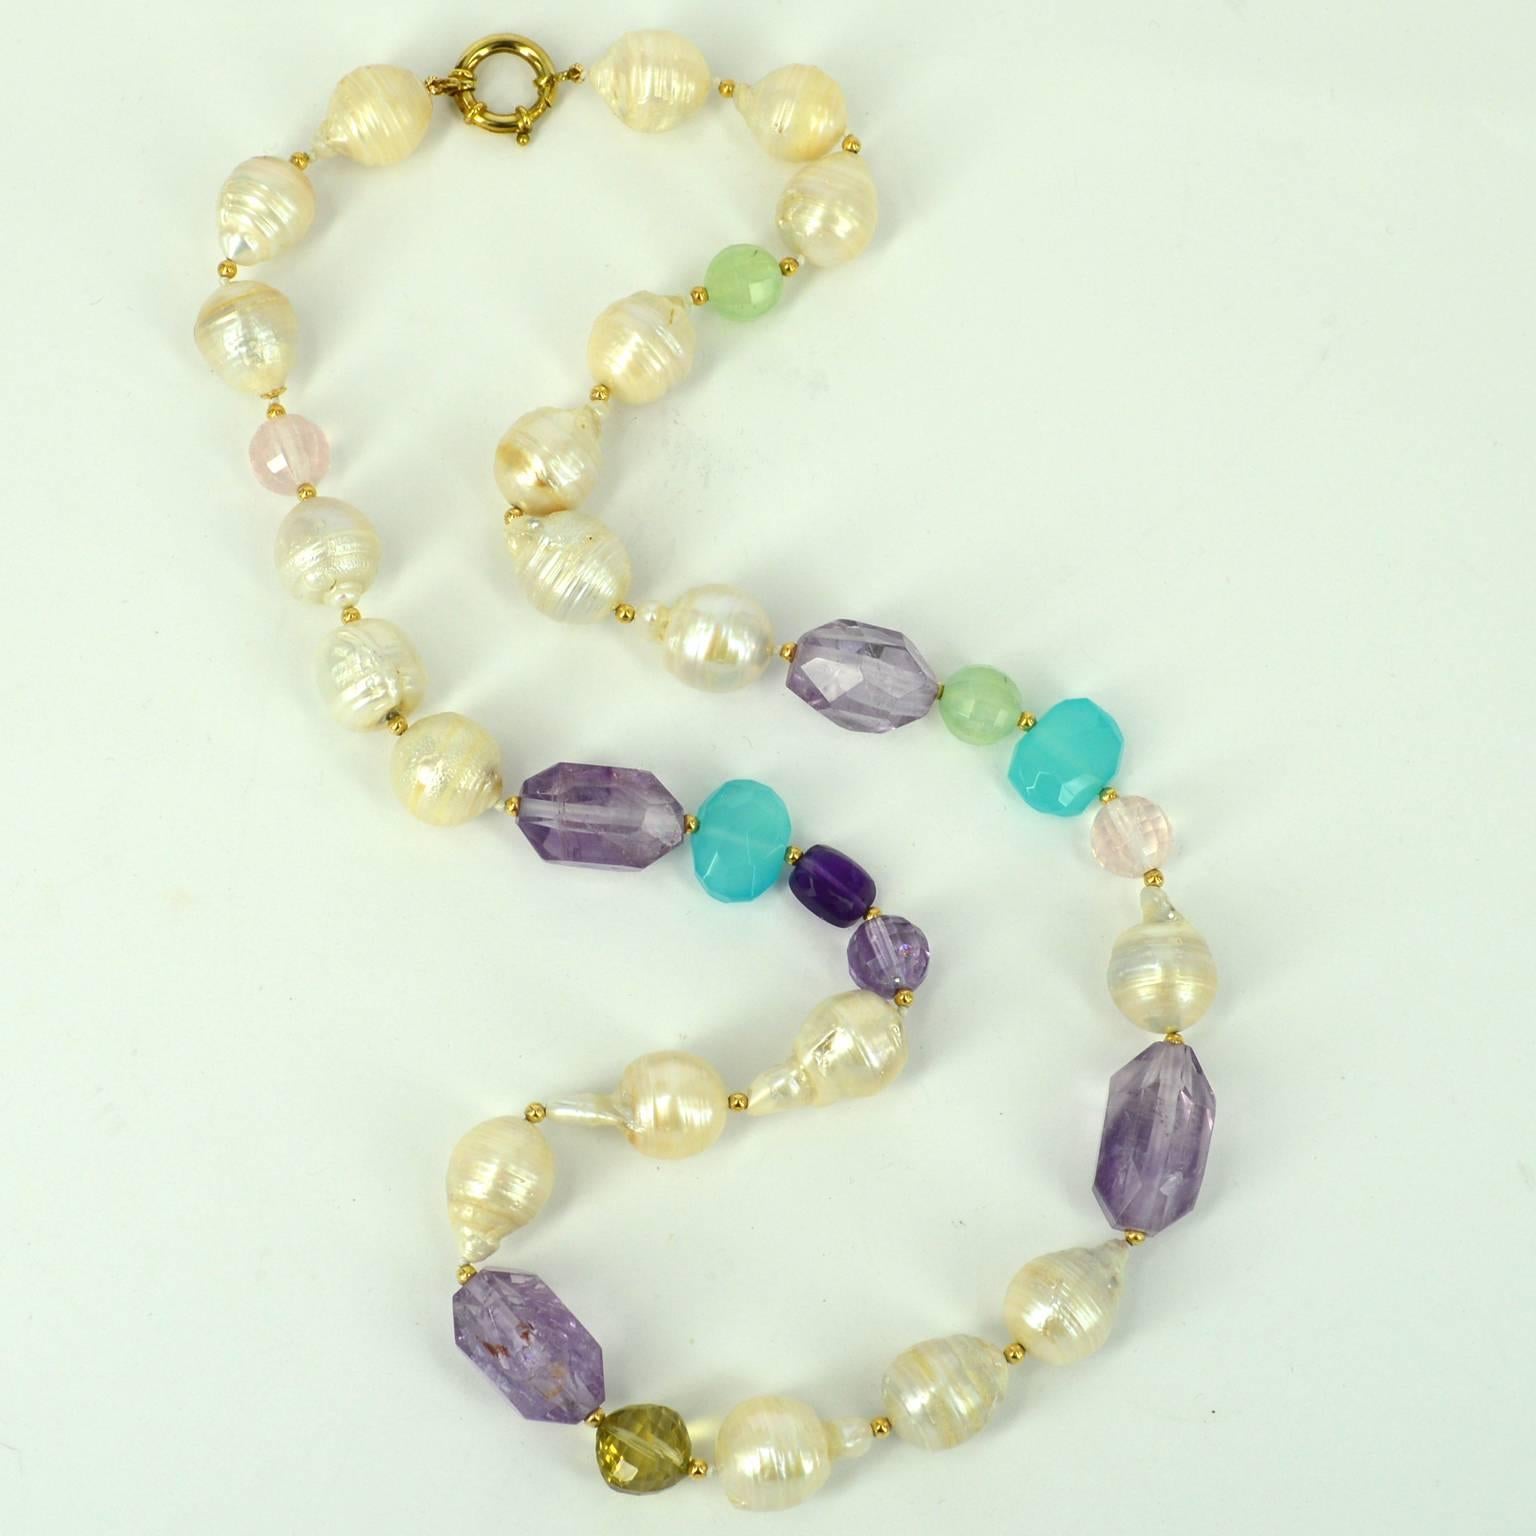 Long multi-hued necklace featuring Crinkled and circle Fresh Water Pearls, Light and Dark Amethyst, Rose and Lemon Quartz with a bright spark of Sea Blue Chalcedony. Hand knotted and spaced with 3mm 14k gold filled beads and finished with a 16mm